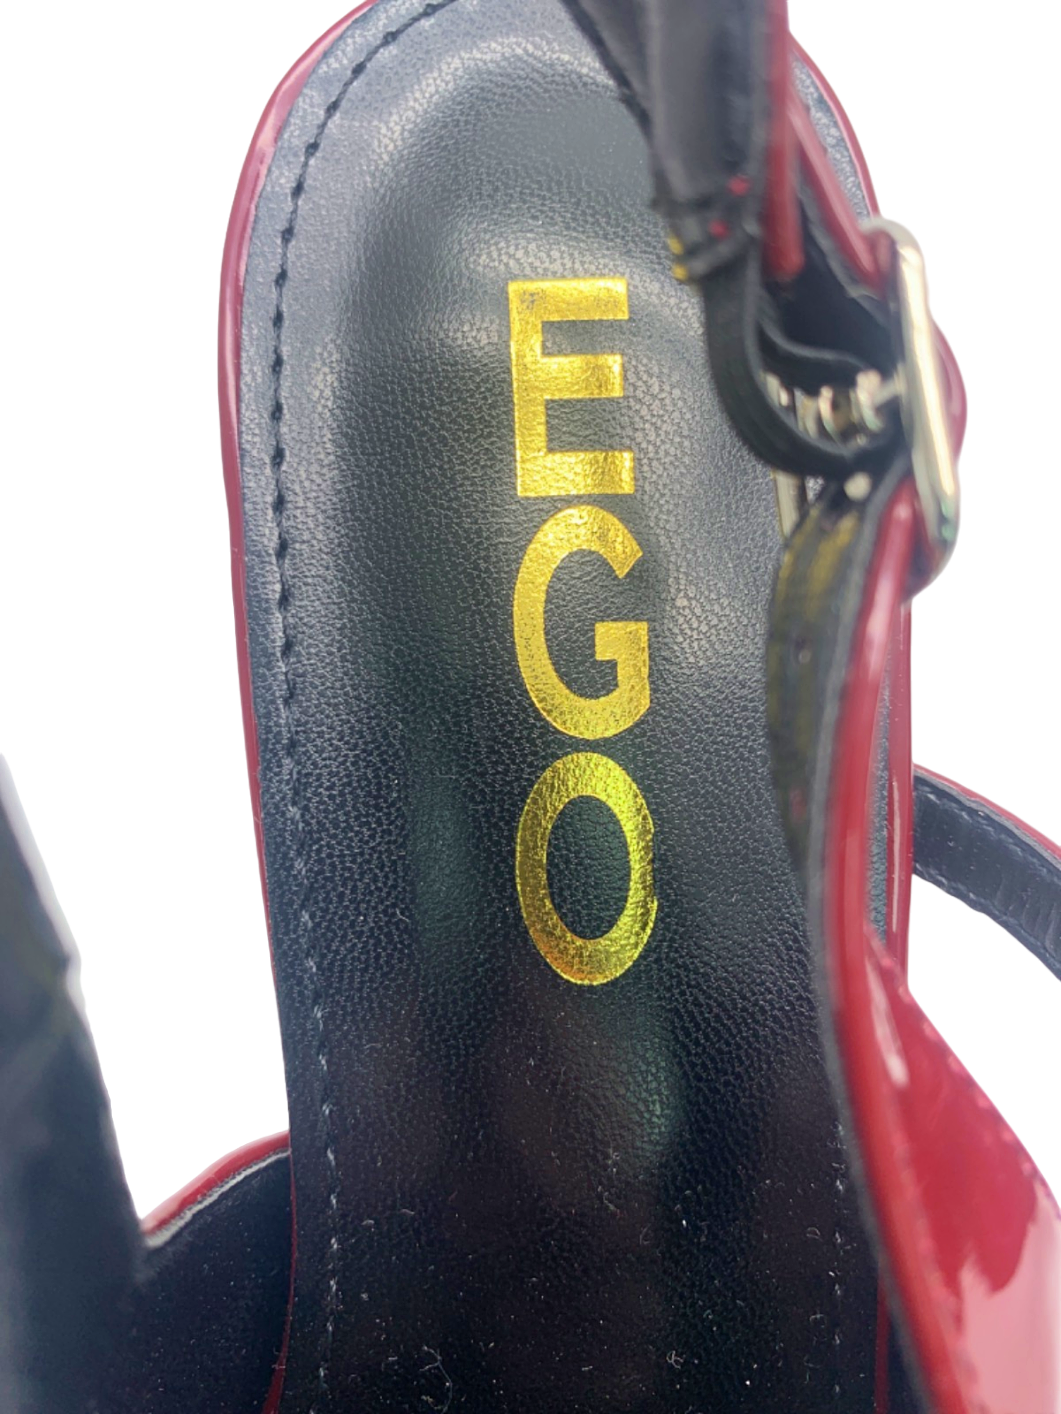 EGO Red Strappy Patent Heels UK Size 5